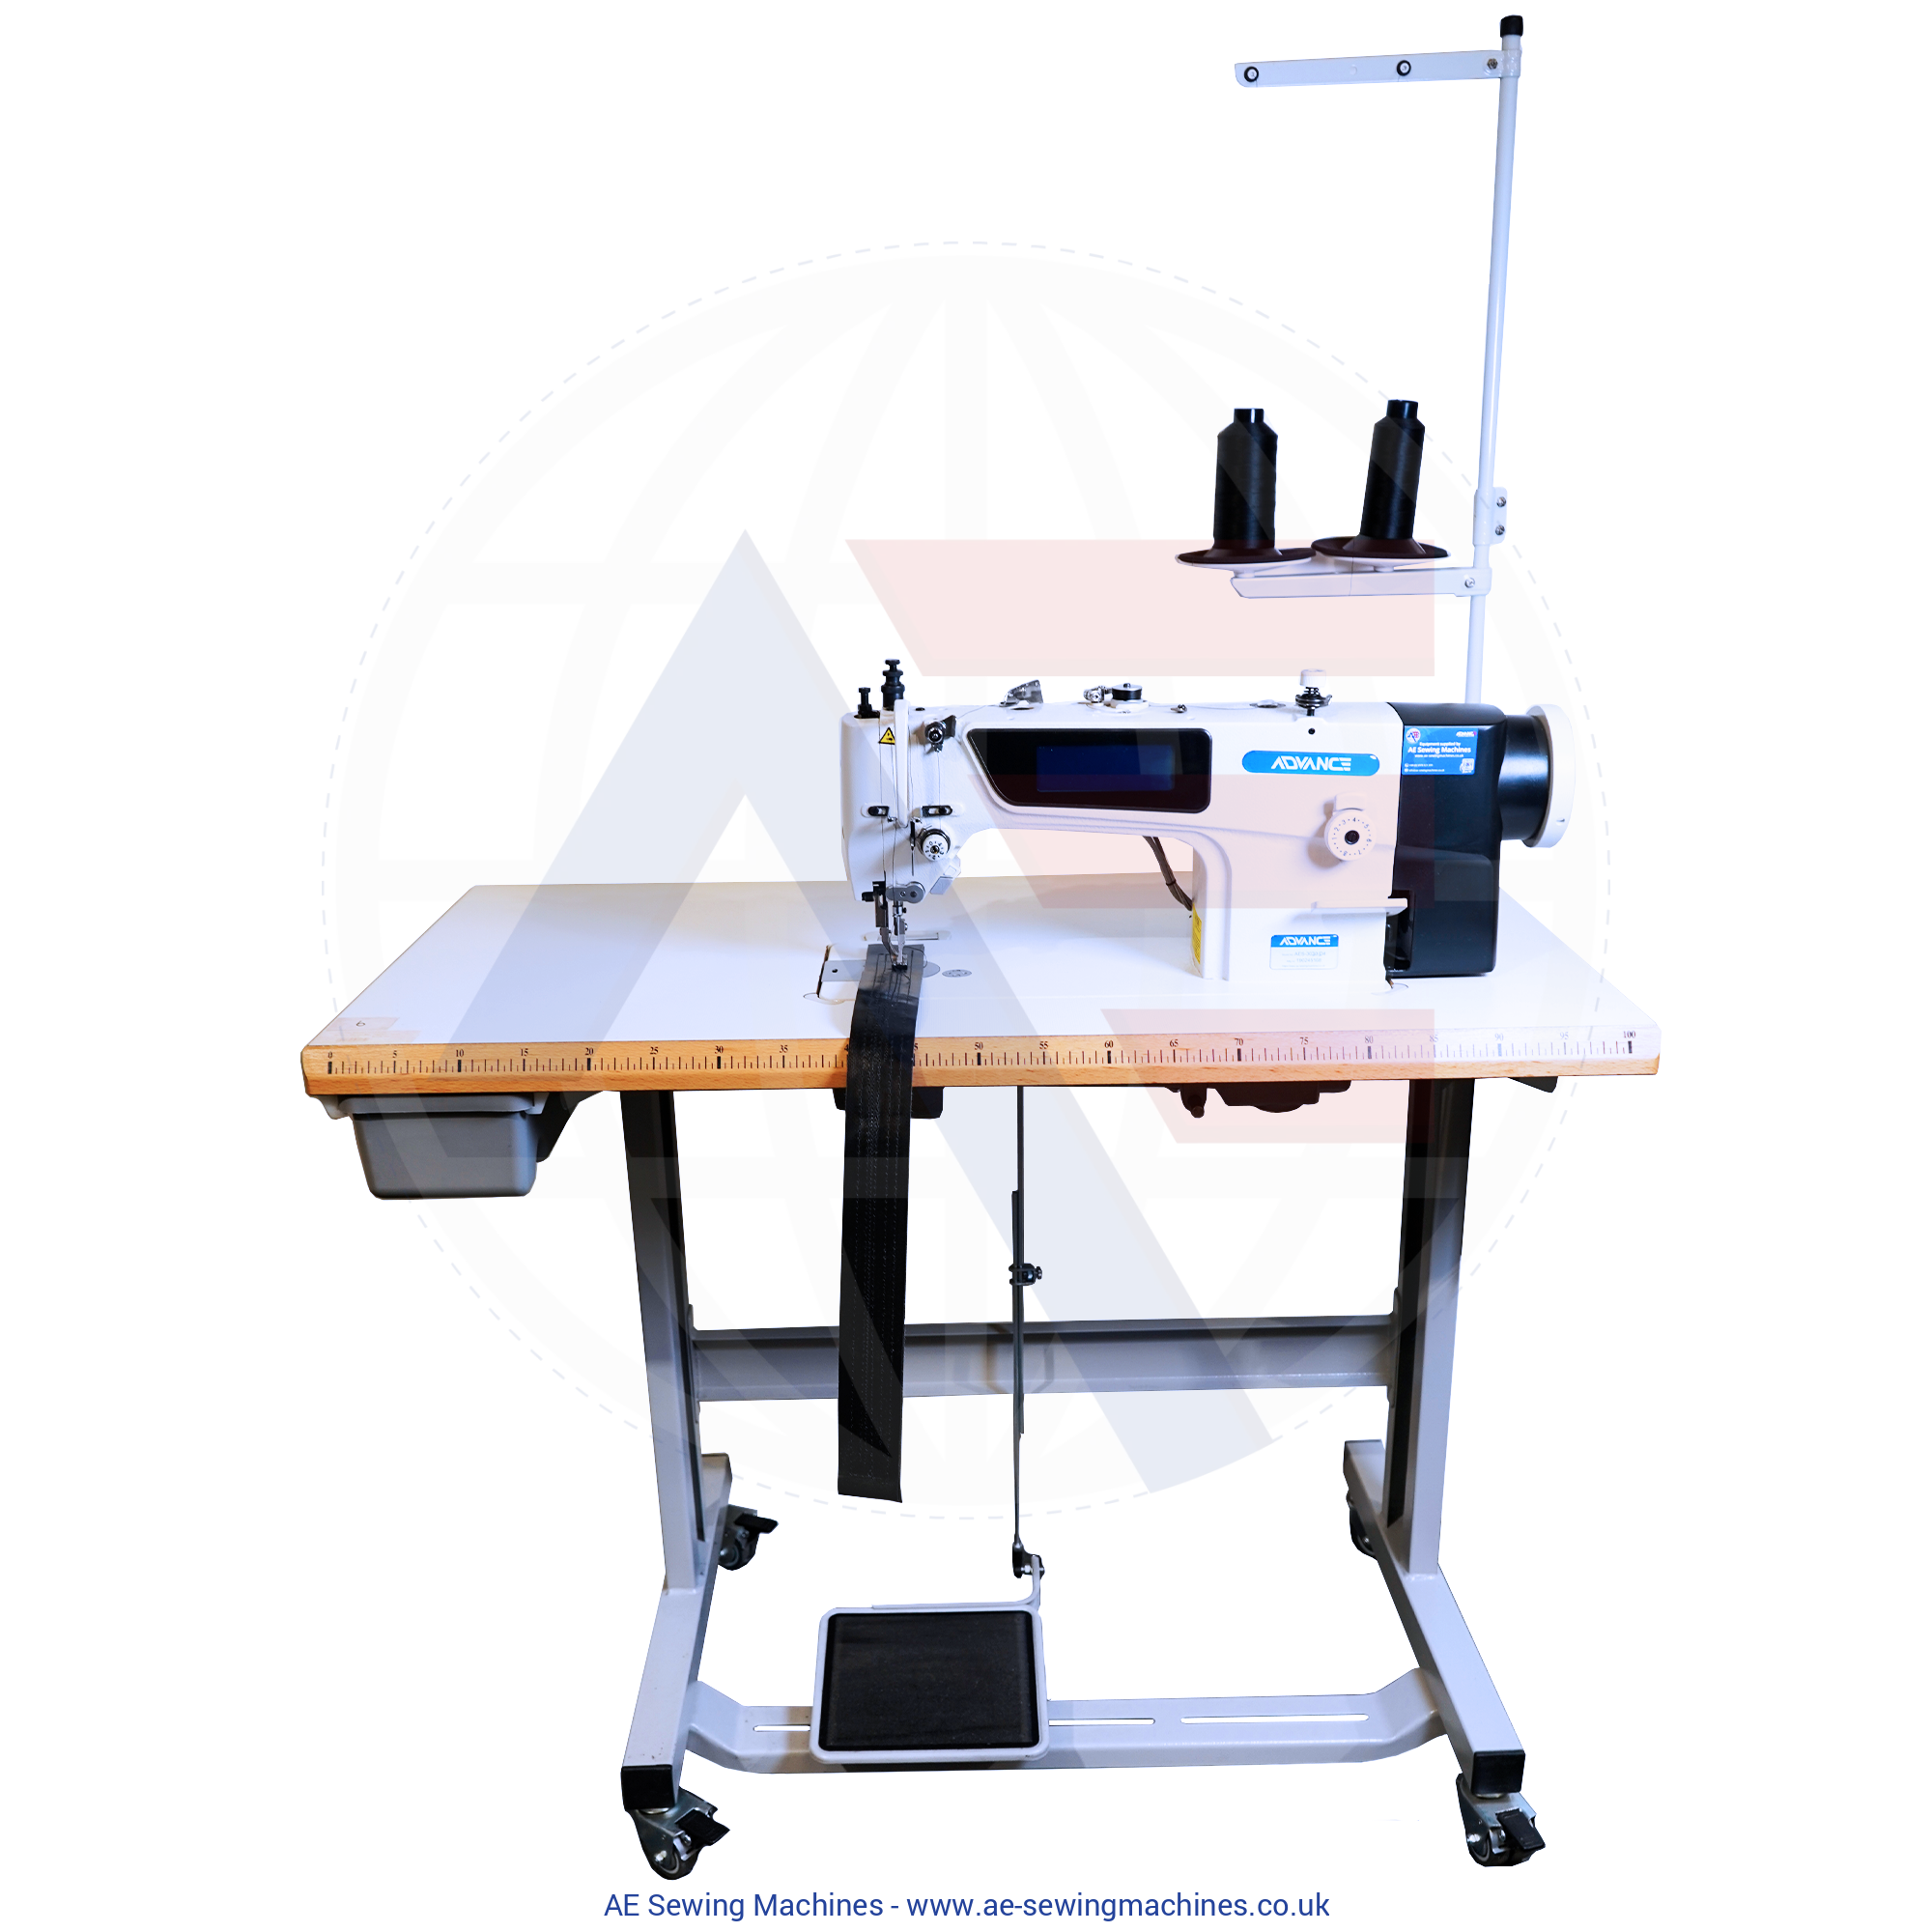 Advance Aes-3030-D4 1-Needle Walking-Foot Machine With Automatic Functions